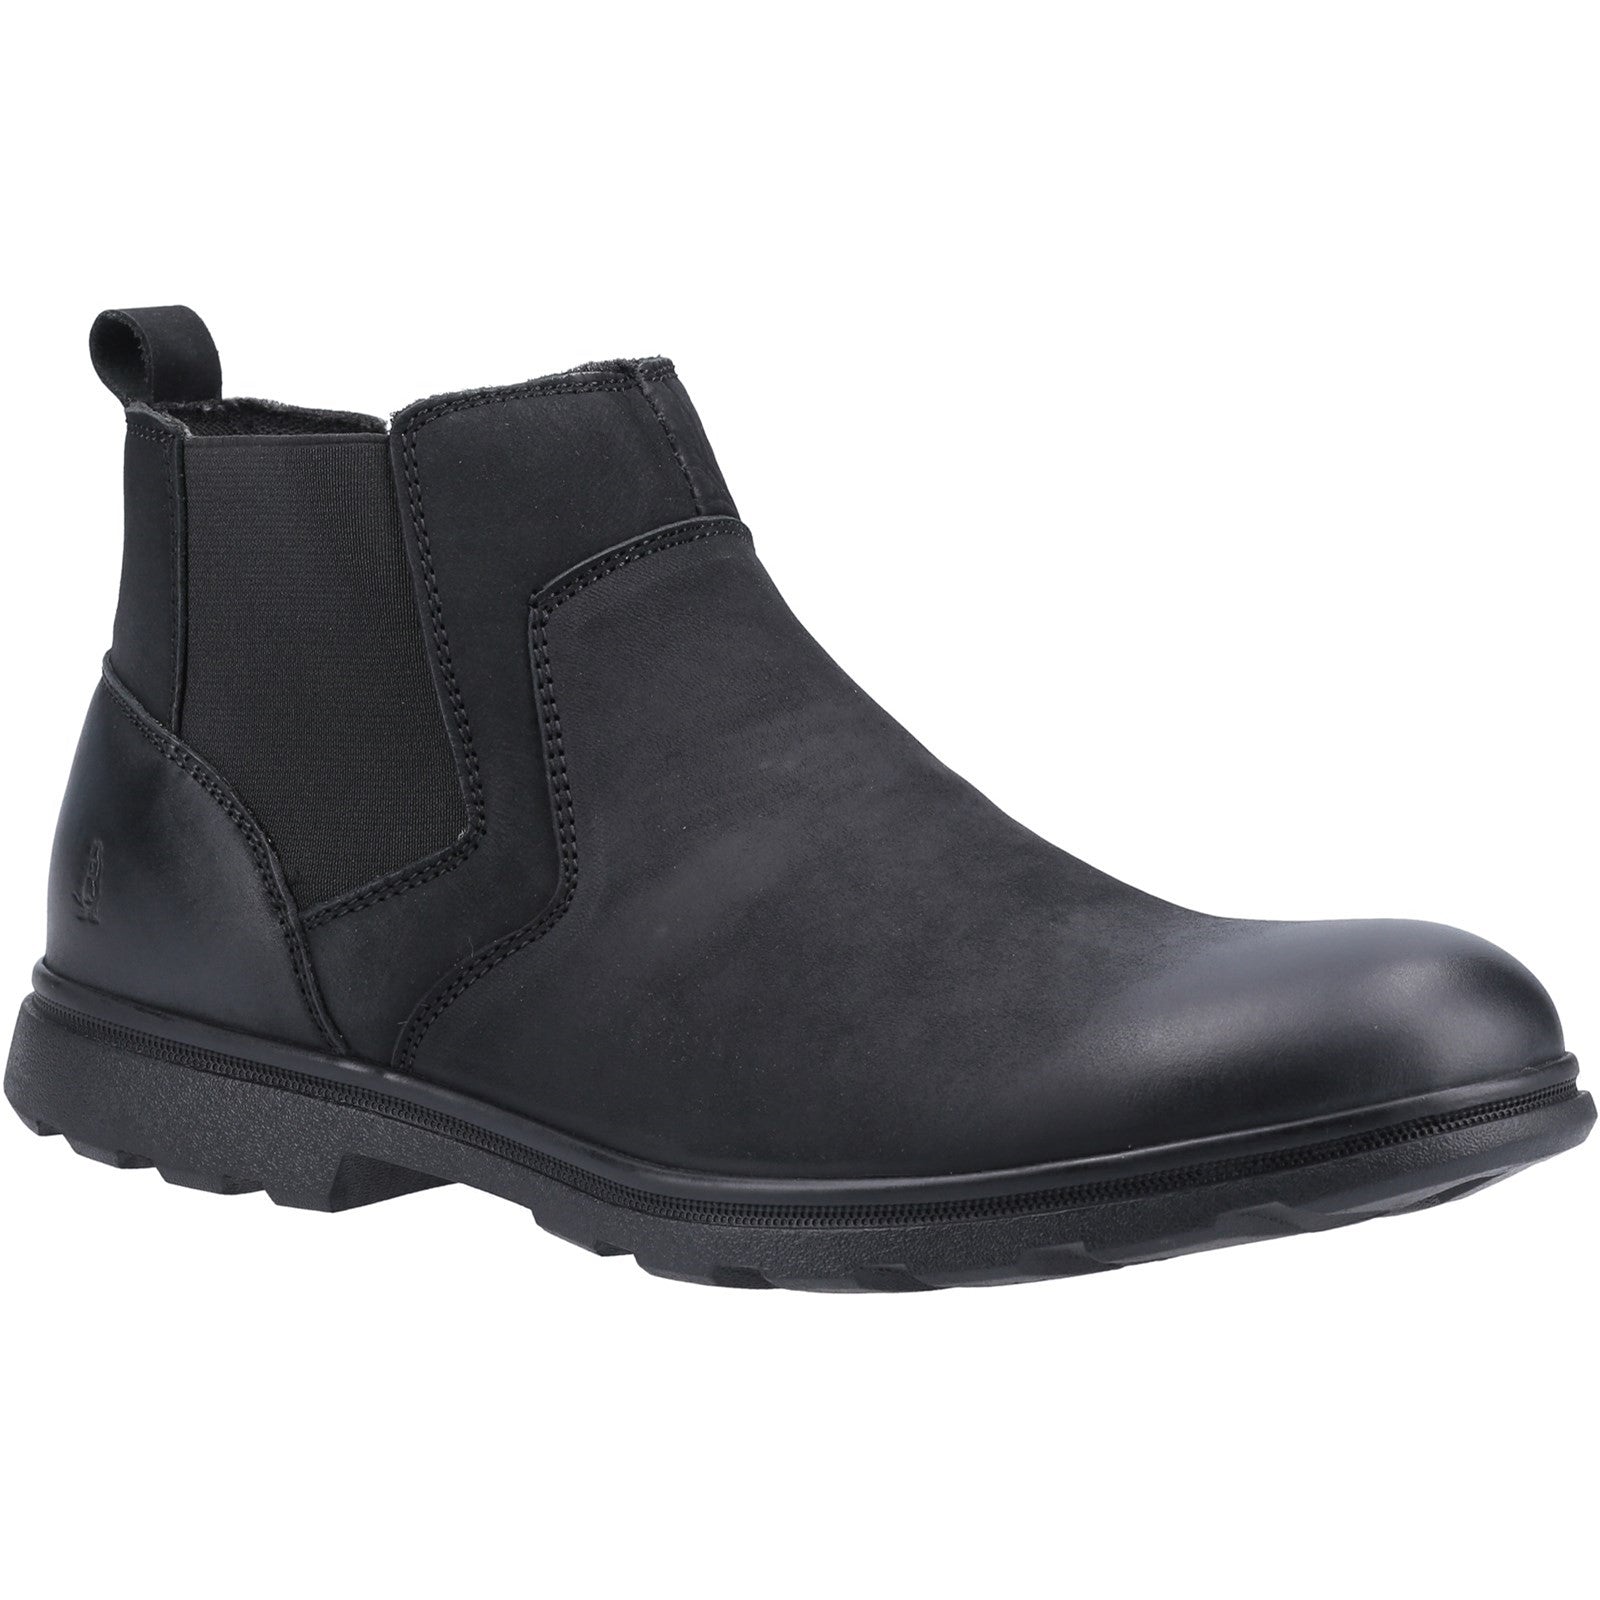 Mens Boots Black Hush Puppies Tyrone Boots